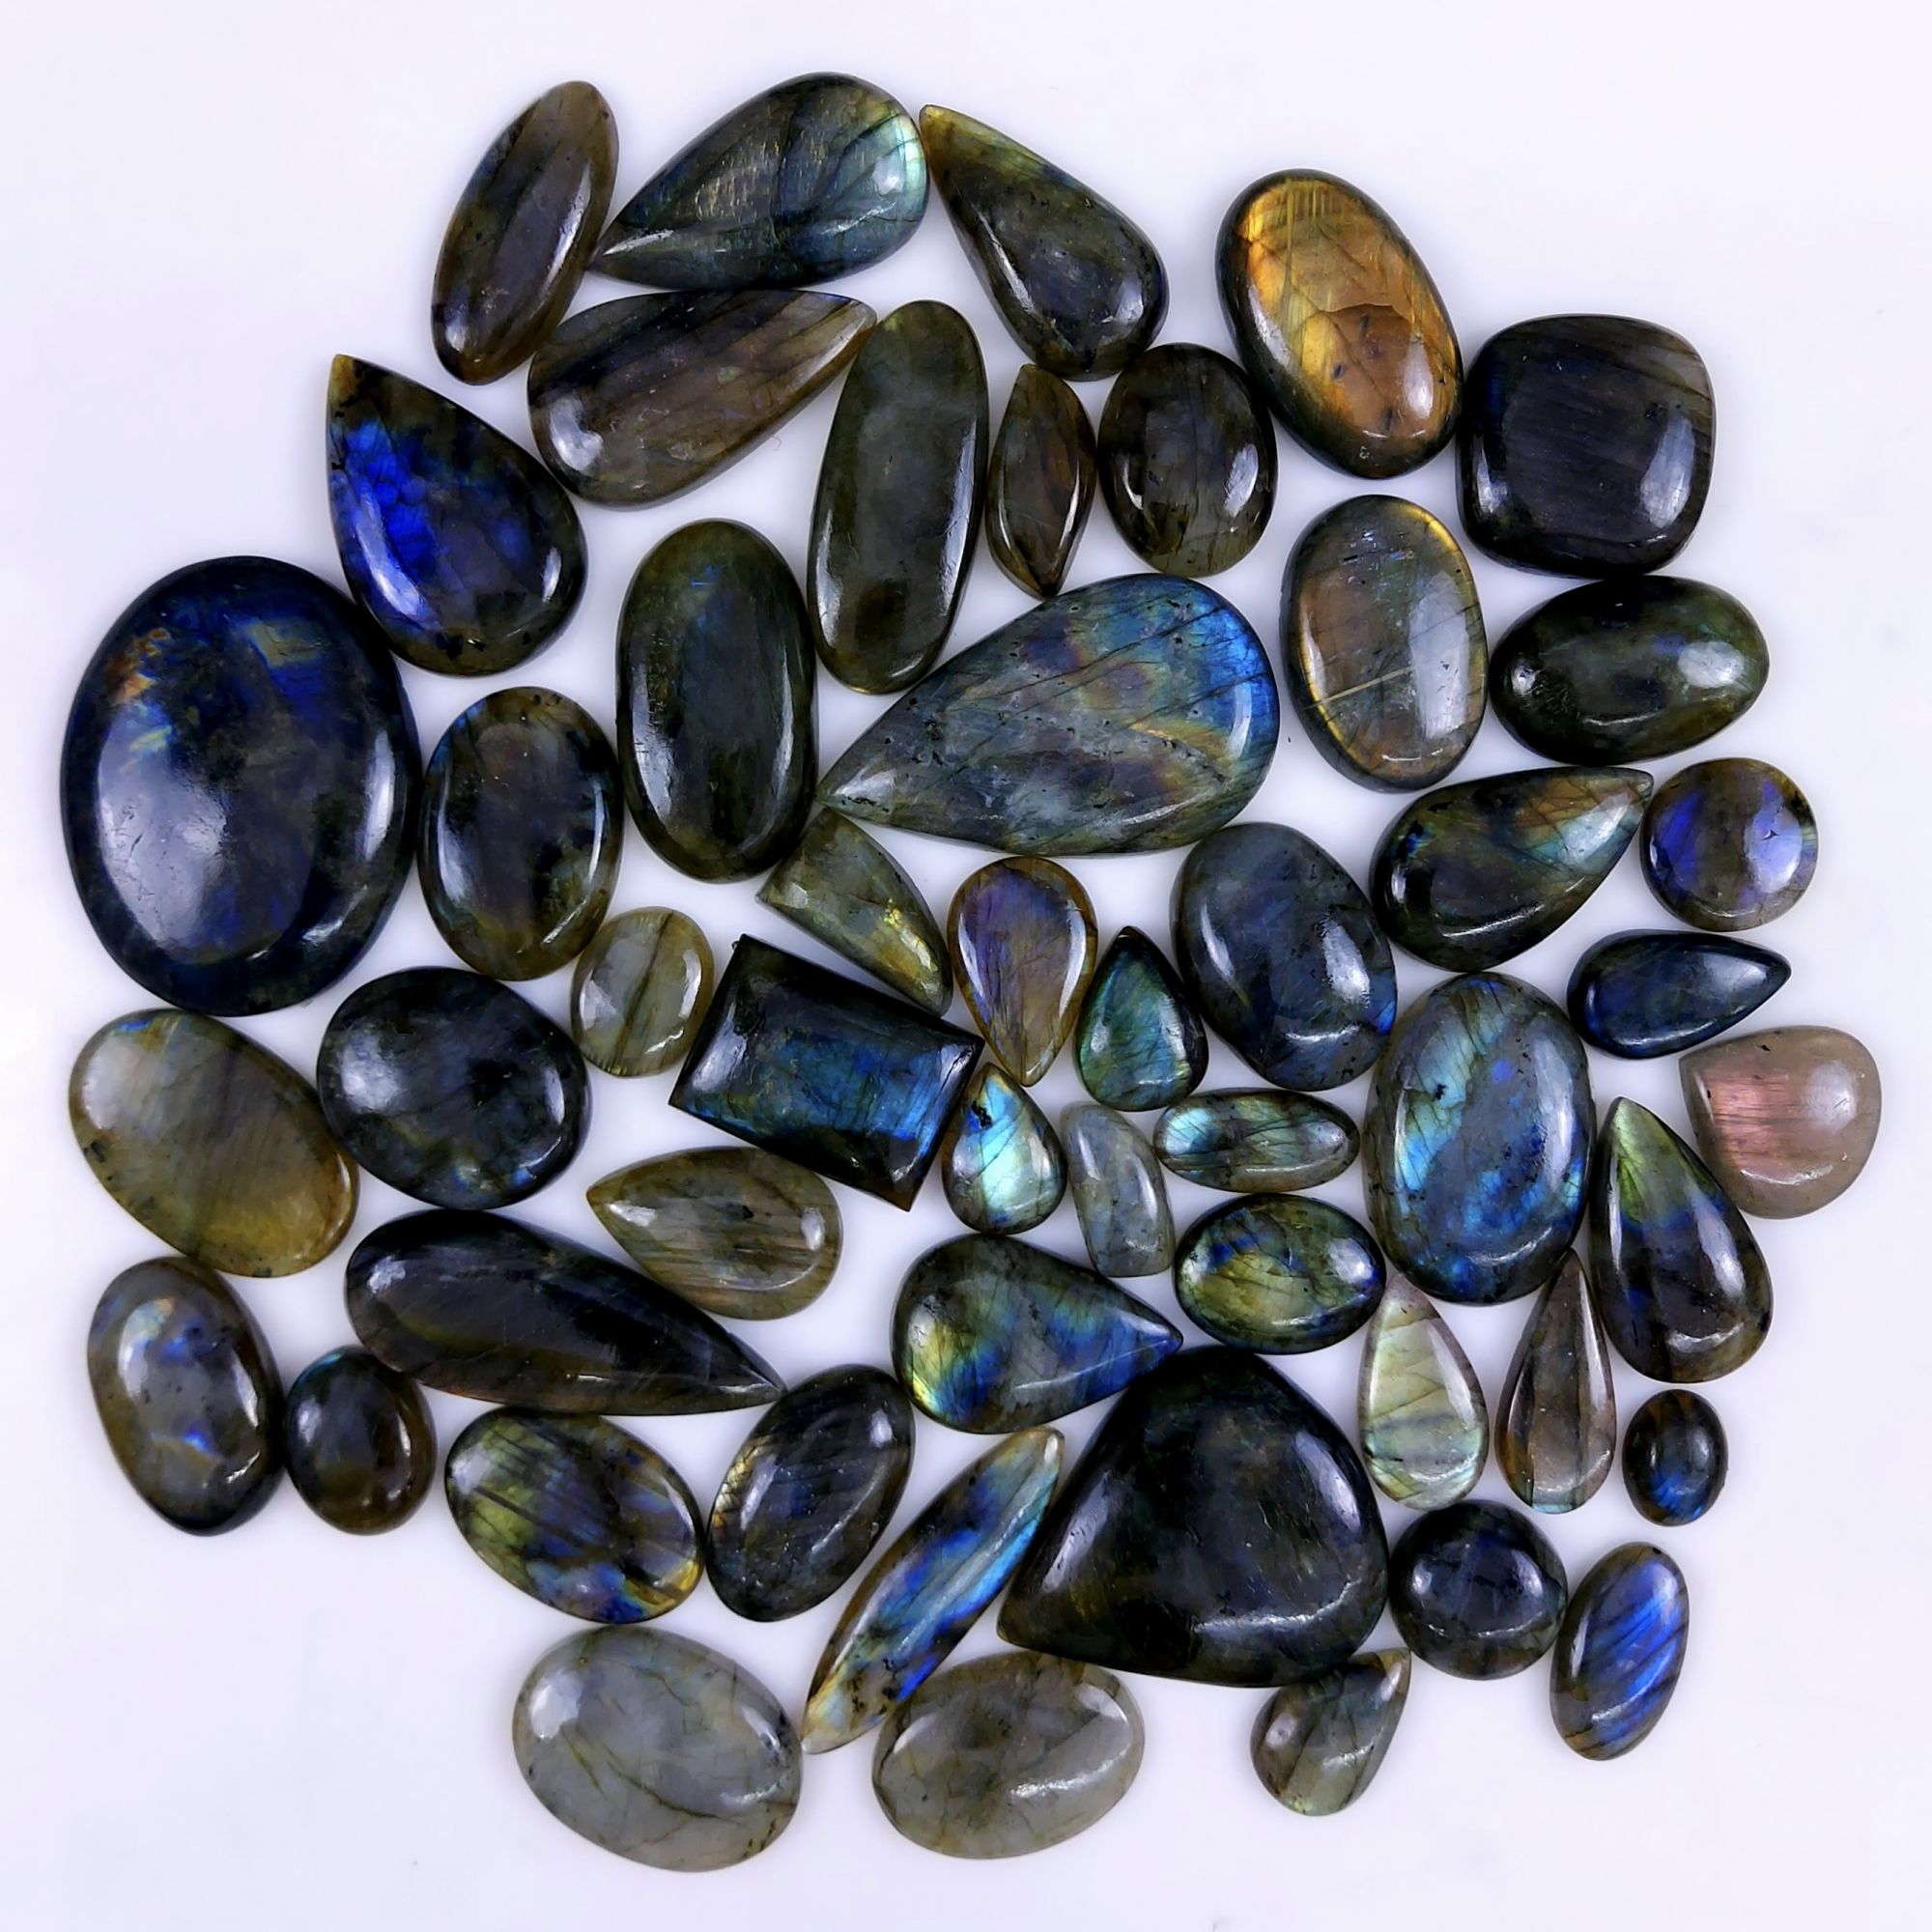 51pc 1732Cts Labradorite Cabochon Multifire Healing Crystal For Jewelry Supplies, Labradorite Necklace Handmade Wire Wrapped Gemstone Pendant 50x35 15x10mm#6288